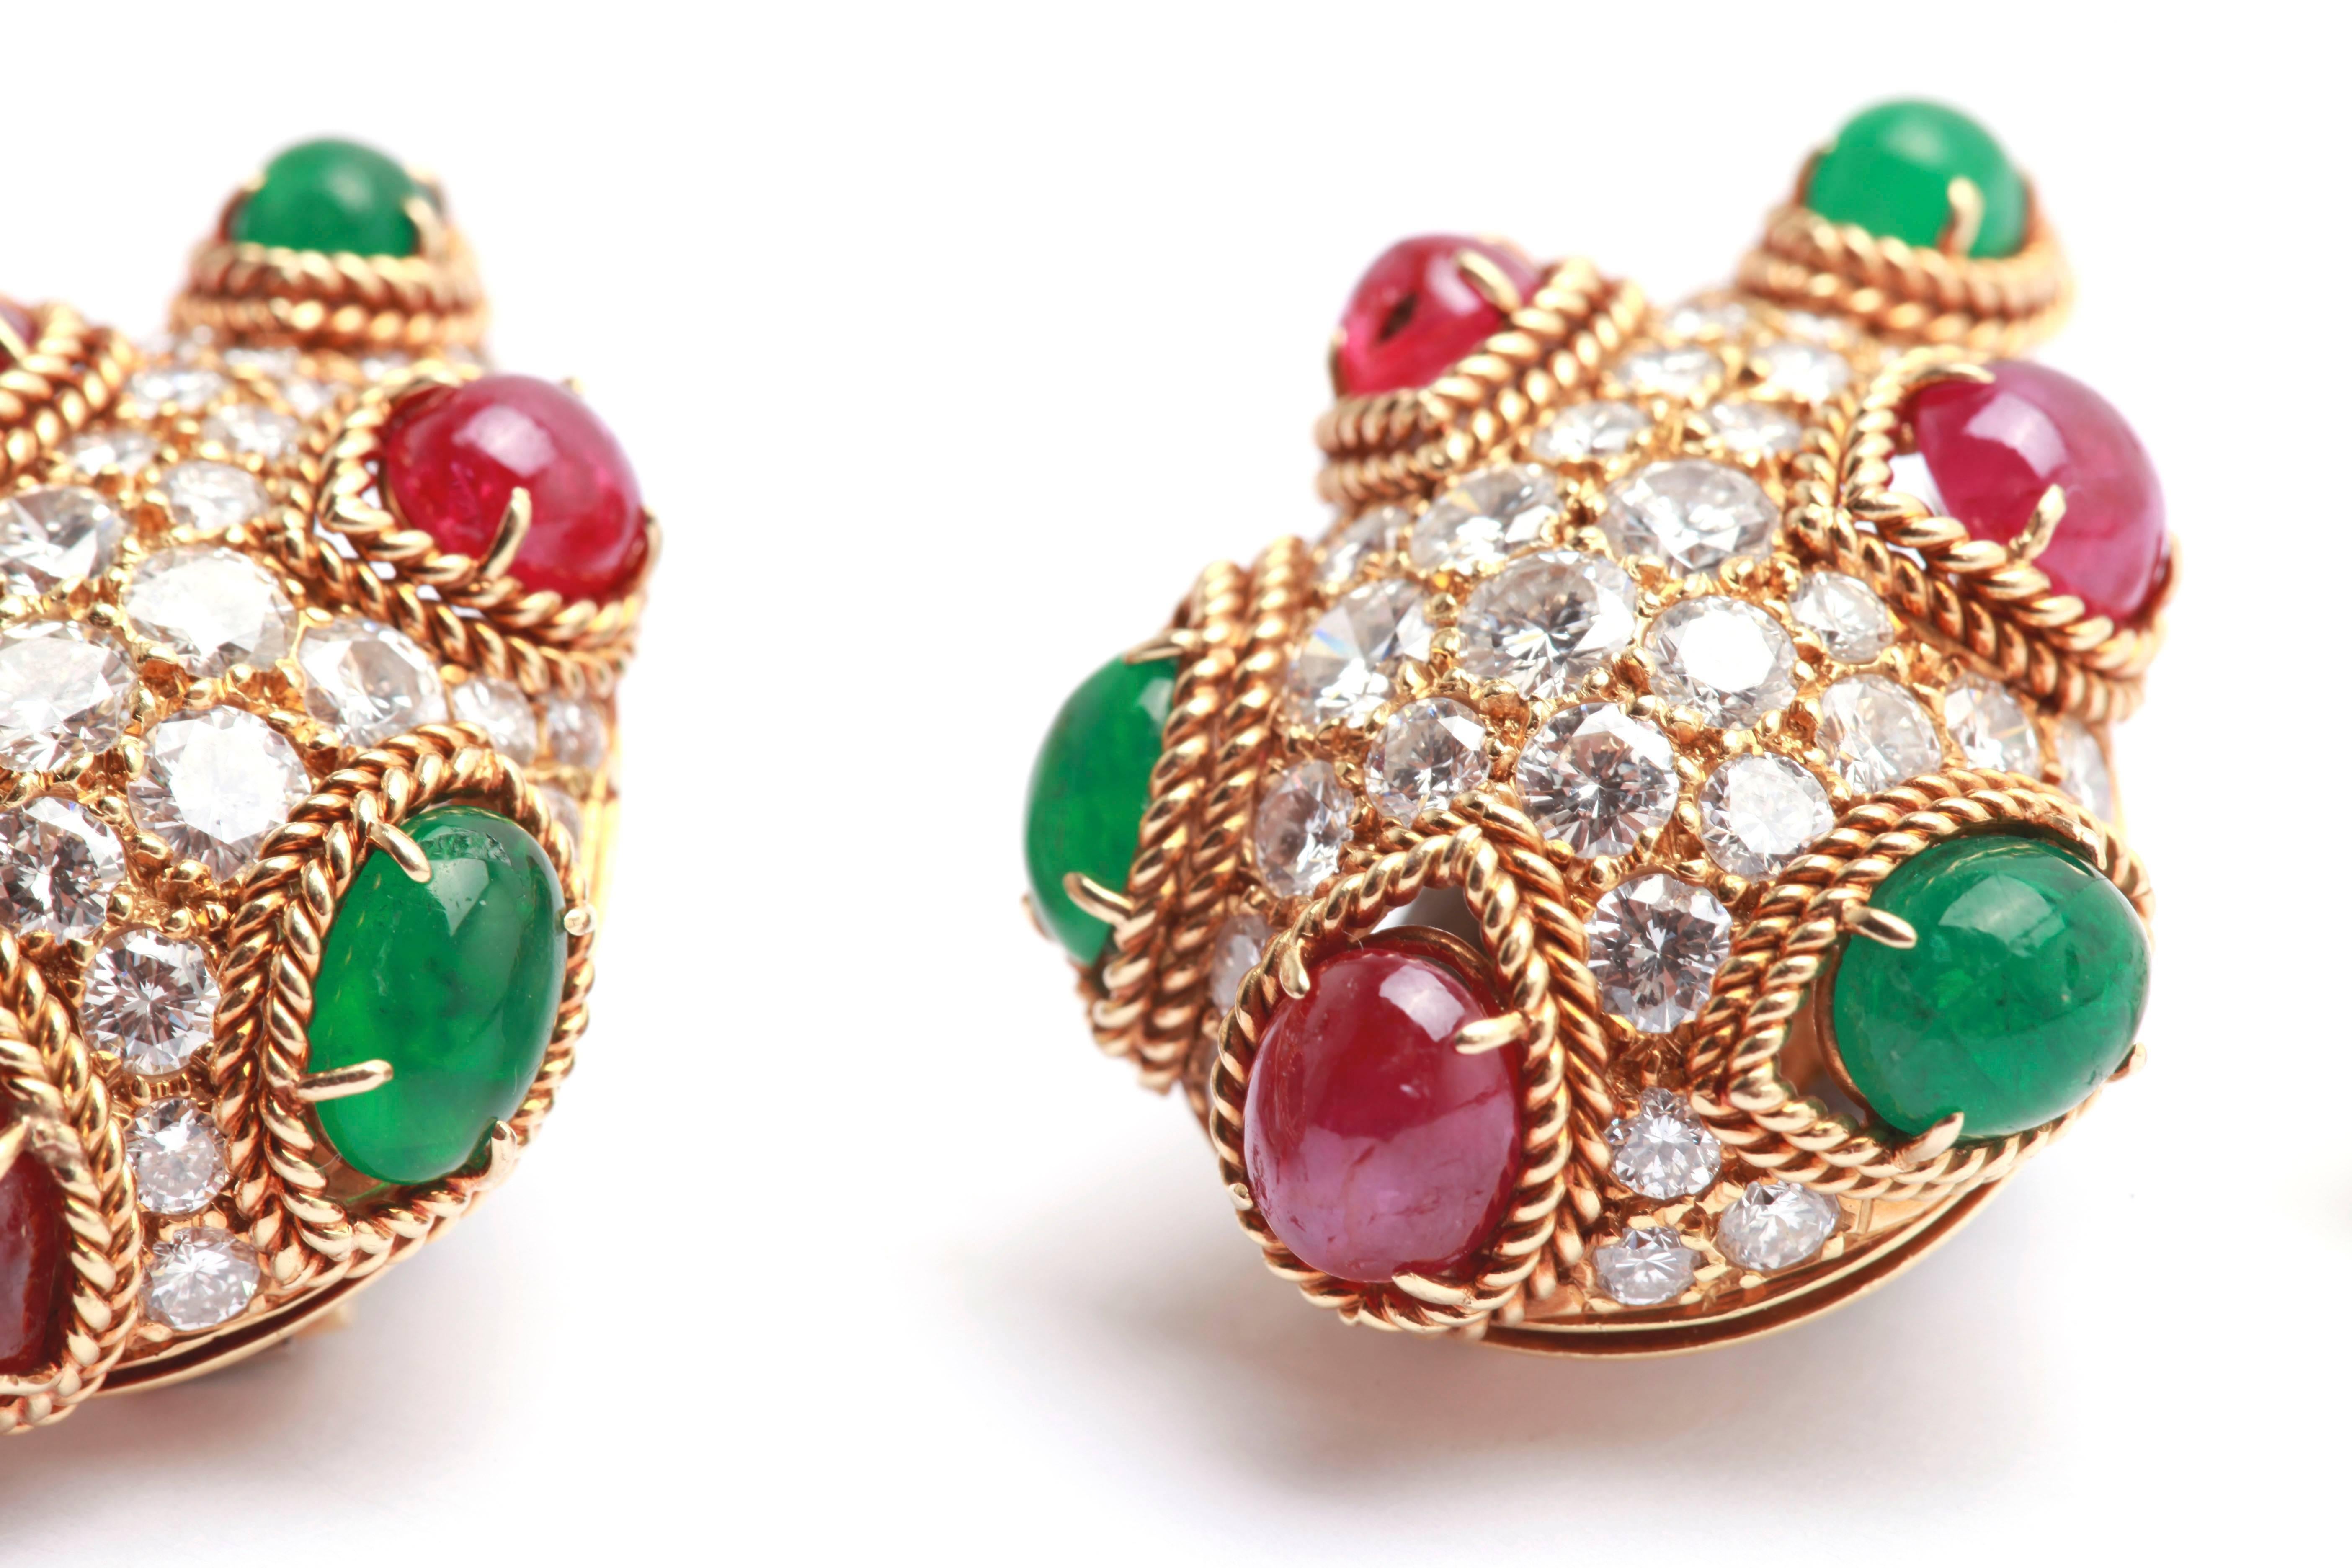 
A sophisticated and colorful pair of pear shaped ear clips by Van Cleef & Arpels, with fine brilliant diamonds, embellished by cabochon rubies and emeralds. Made in France, circa 1965.